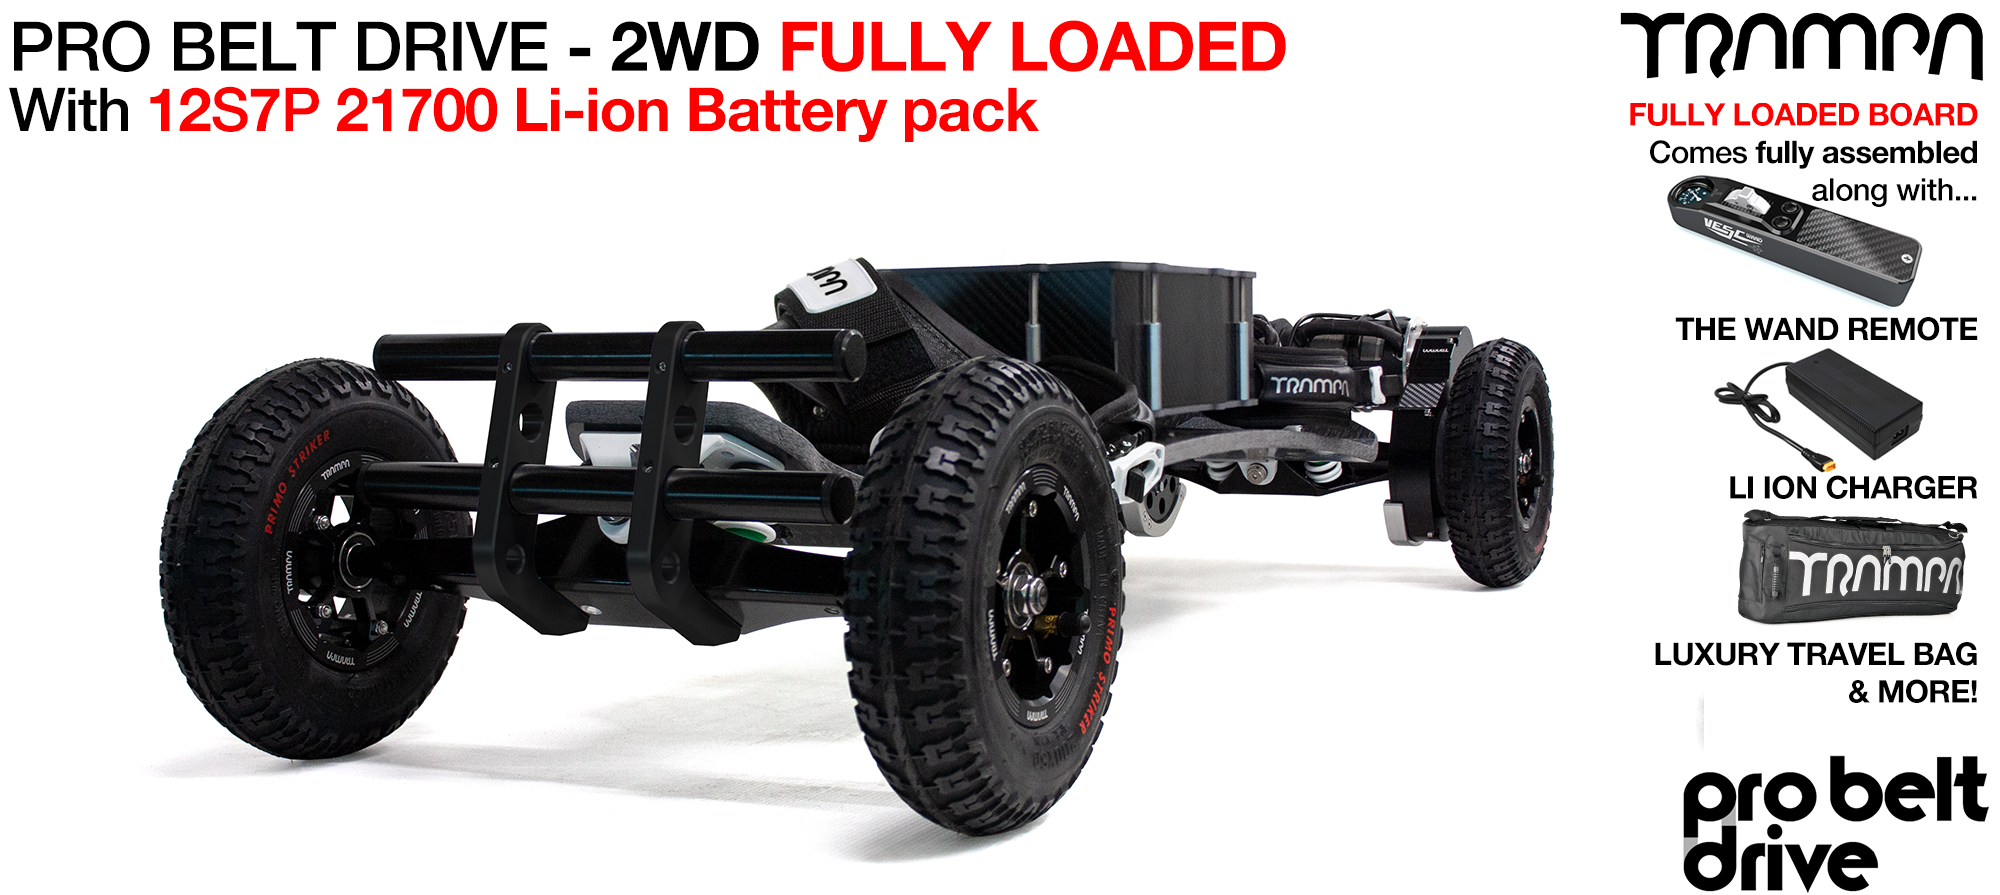 2WD 16mm PRO BELT DRIVE E-MTB - LOADED 21700 DOUBLE STACKER (£2,400) (out of stock)